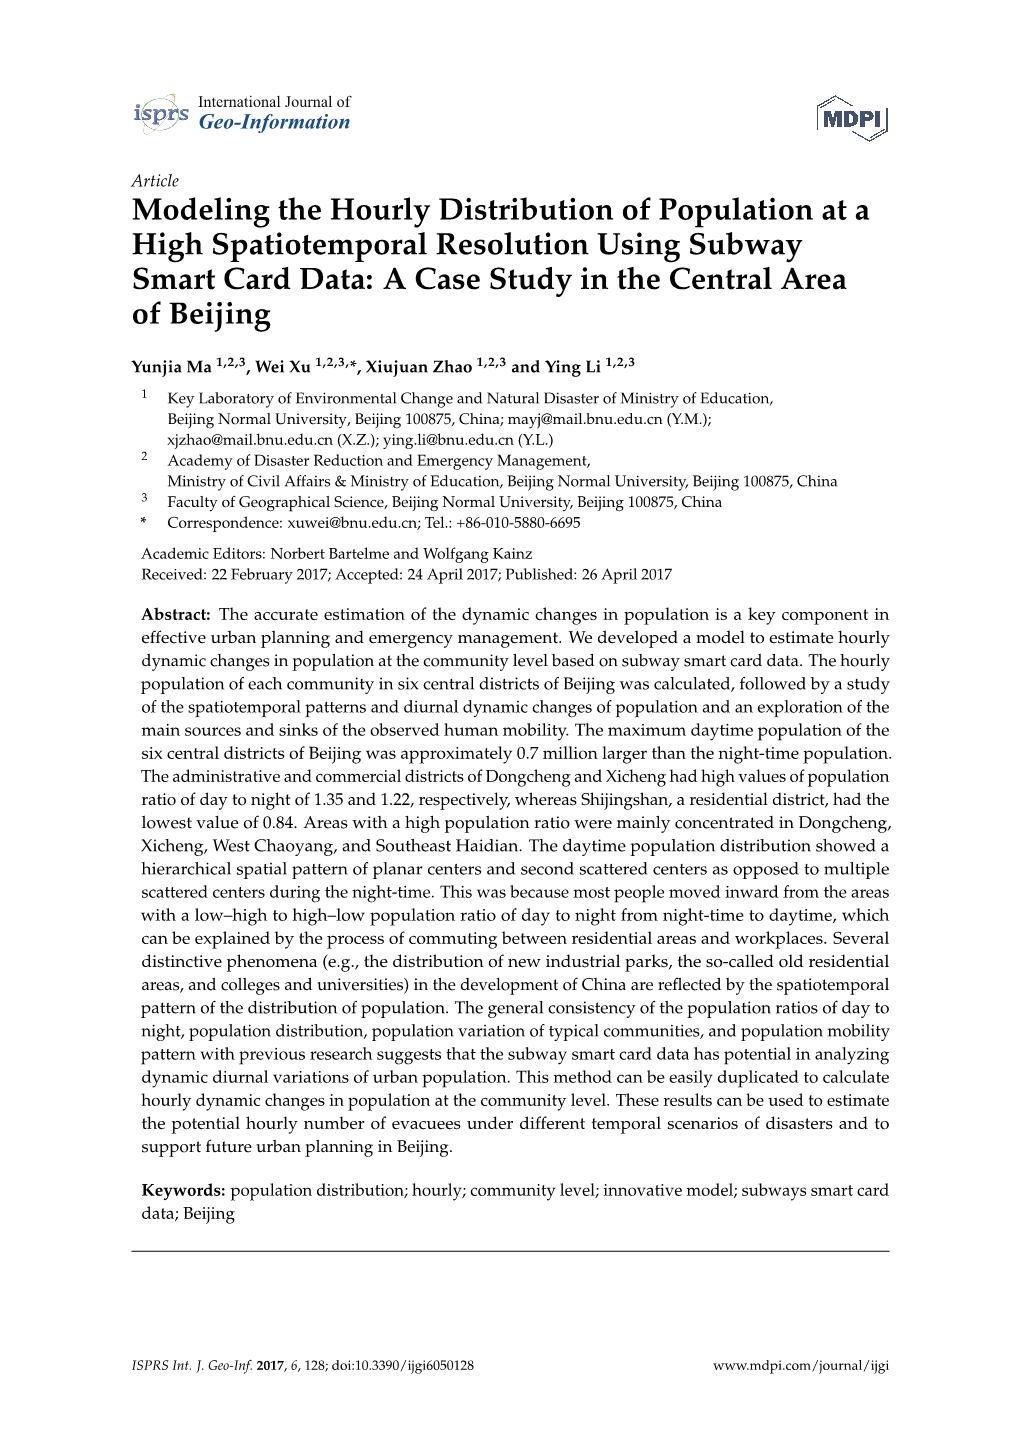 Modeling the Hourly Distribution of Population at a High Spatiotemporal Resolution Using Subway Smart Card Data: a Case Study in the Central Area of Beijing